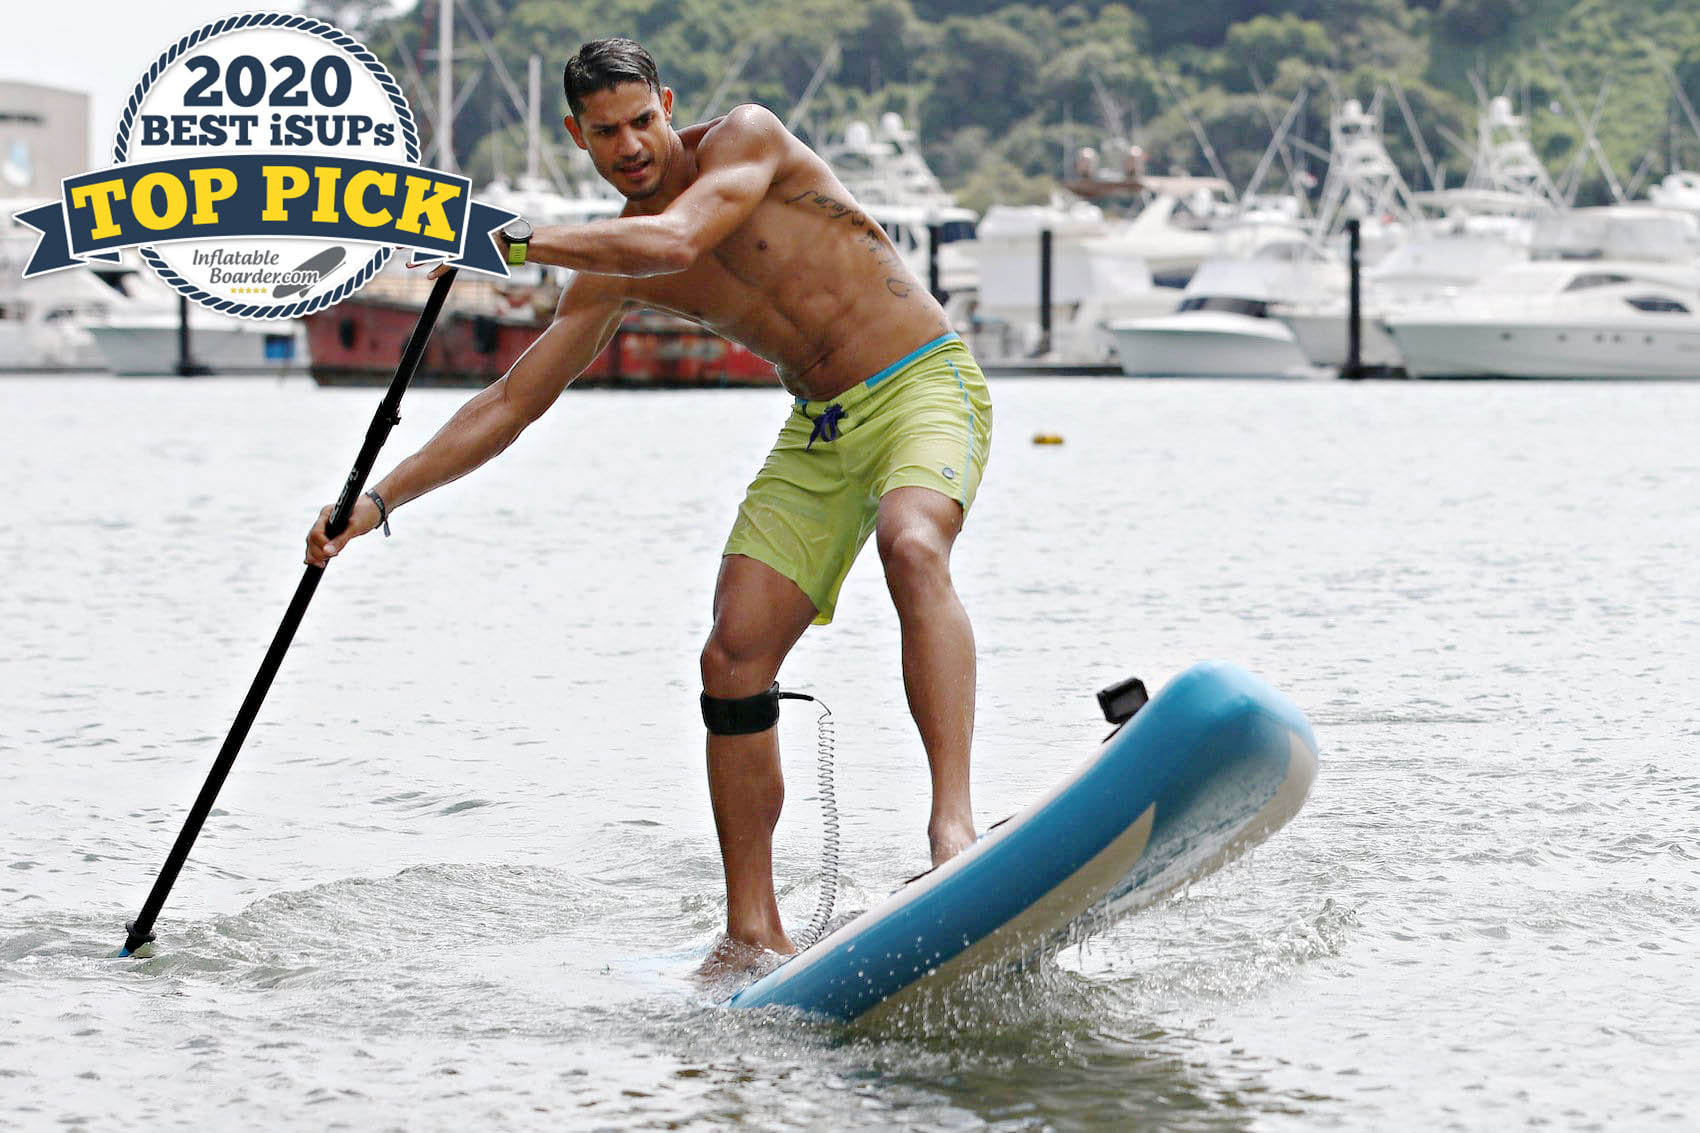 Bluefin Cruise paddle board review - a badge reads "2020 Best iSUPs TOP PICK"